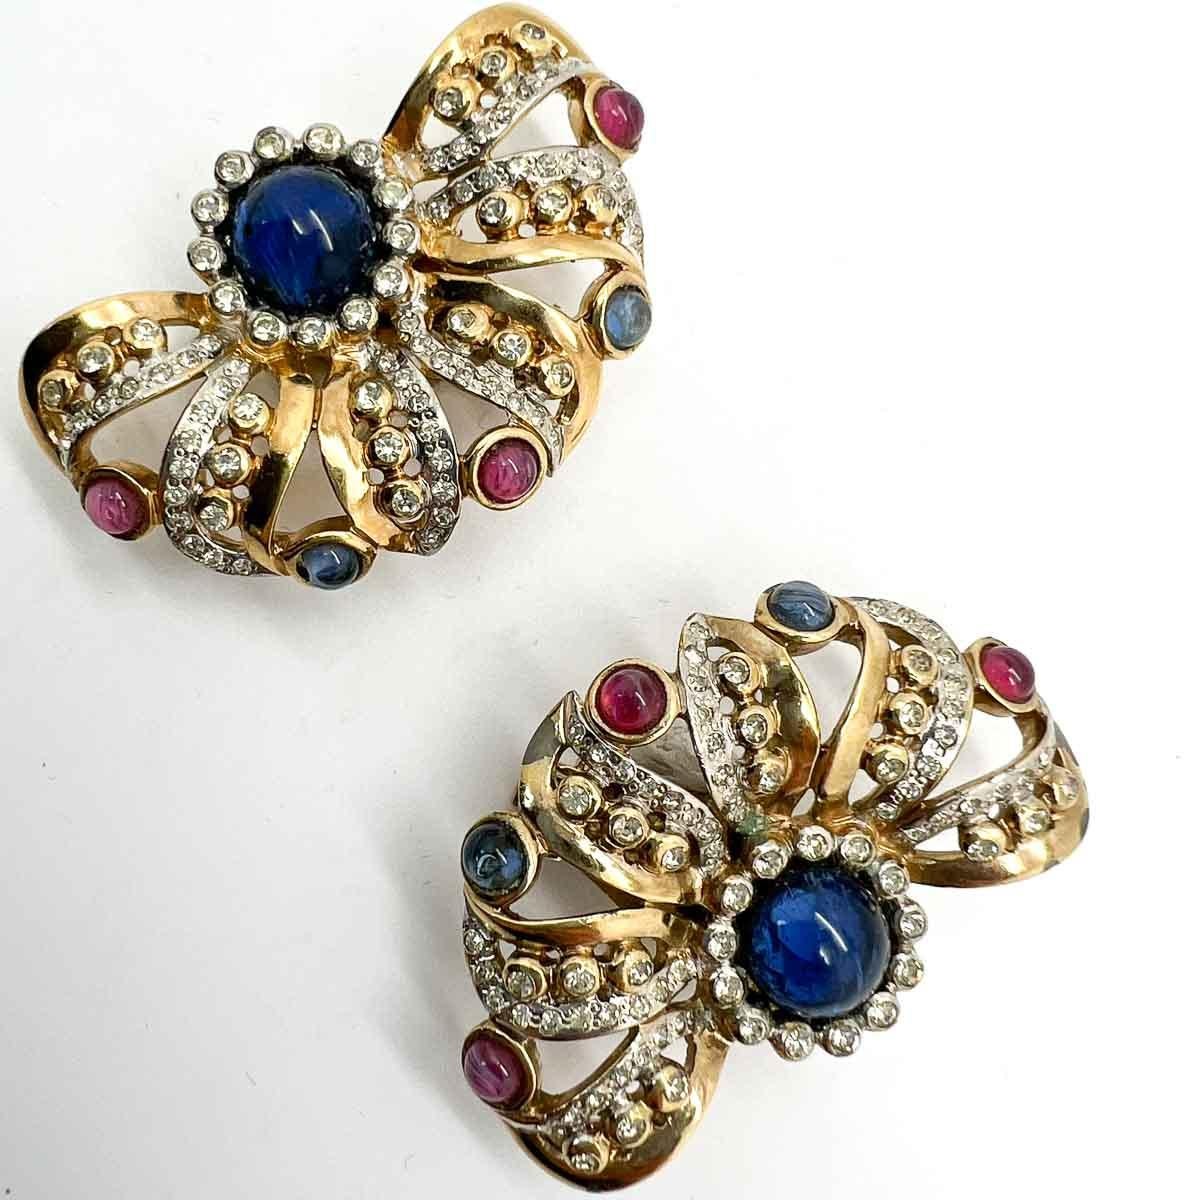 An Italian pair of Vintage Cabochon Fan Earrings. Exquisitely crafted these beauties feature an intricate design set with cabochon stones in sapphire blues and ruby reds. An unsigned beauty. A rare treasure. Just because a jewel doesn’t carry a